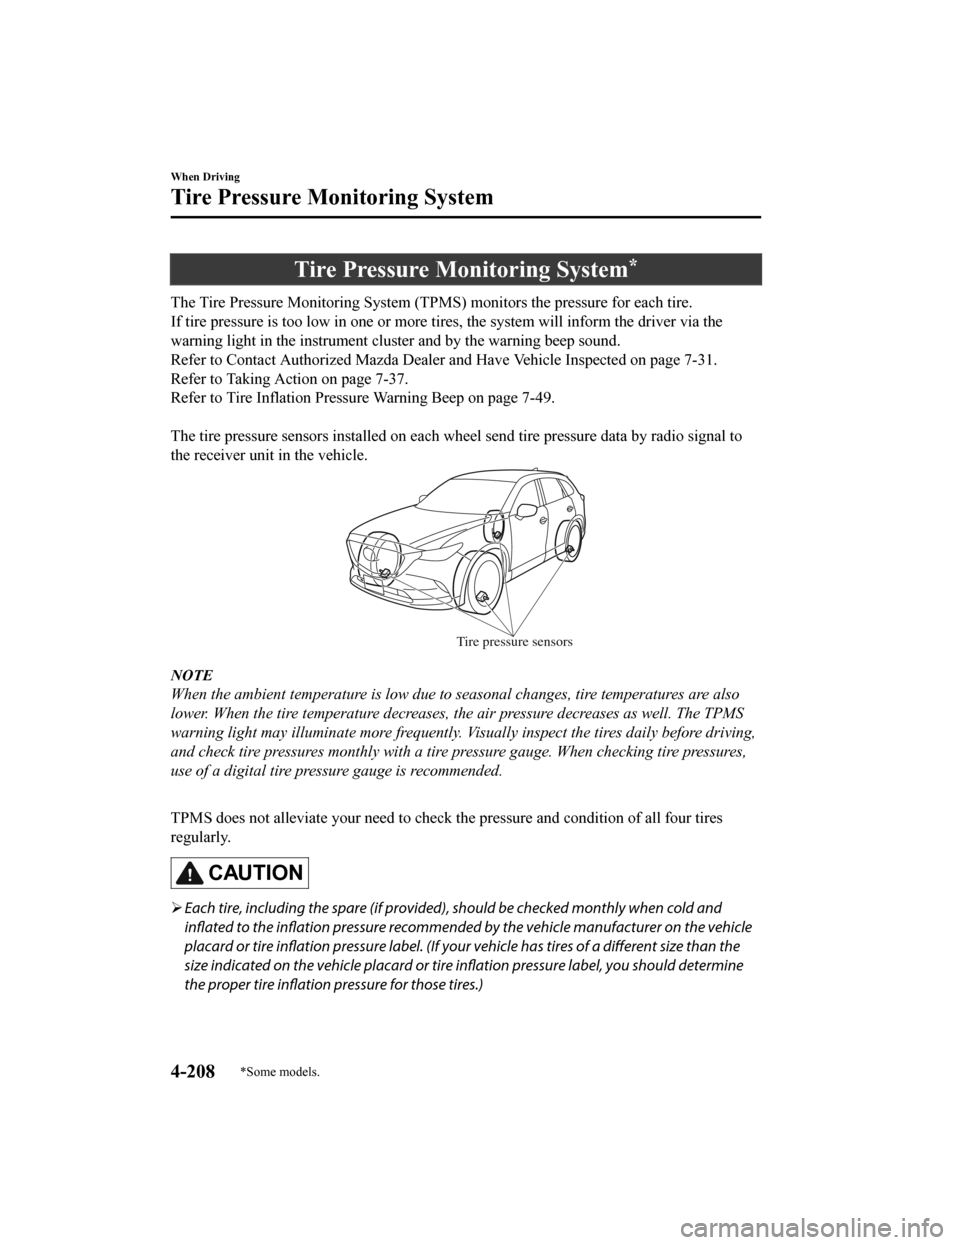 MAZDA MODEL CX-9 2019  Owners Manual (in English) Tire Pressure Monitoring System*
The Tire Pressure Monitoring System (TPMS) monitors the pressure for each tire.
If tire pressure is to o low in one or more  tires, the system will inform the driver v